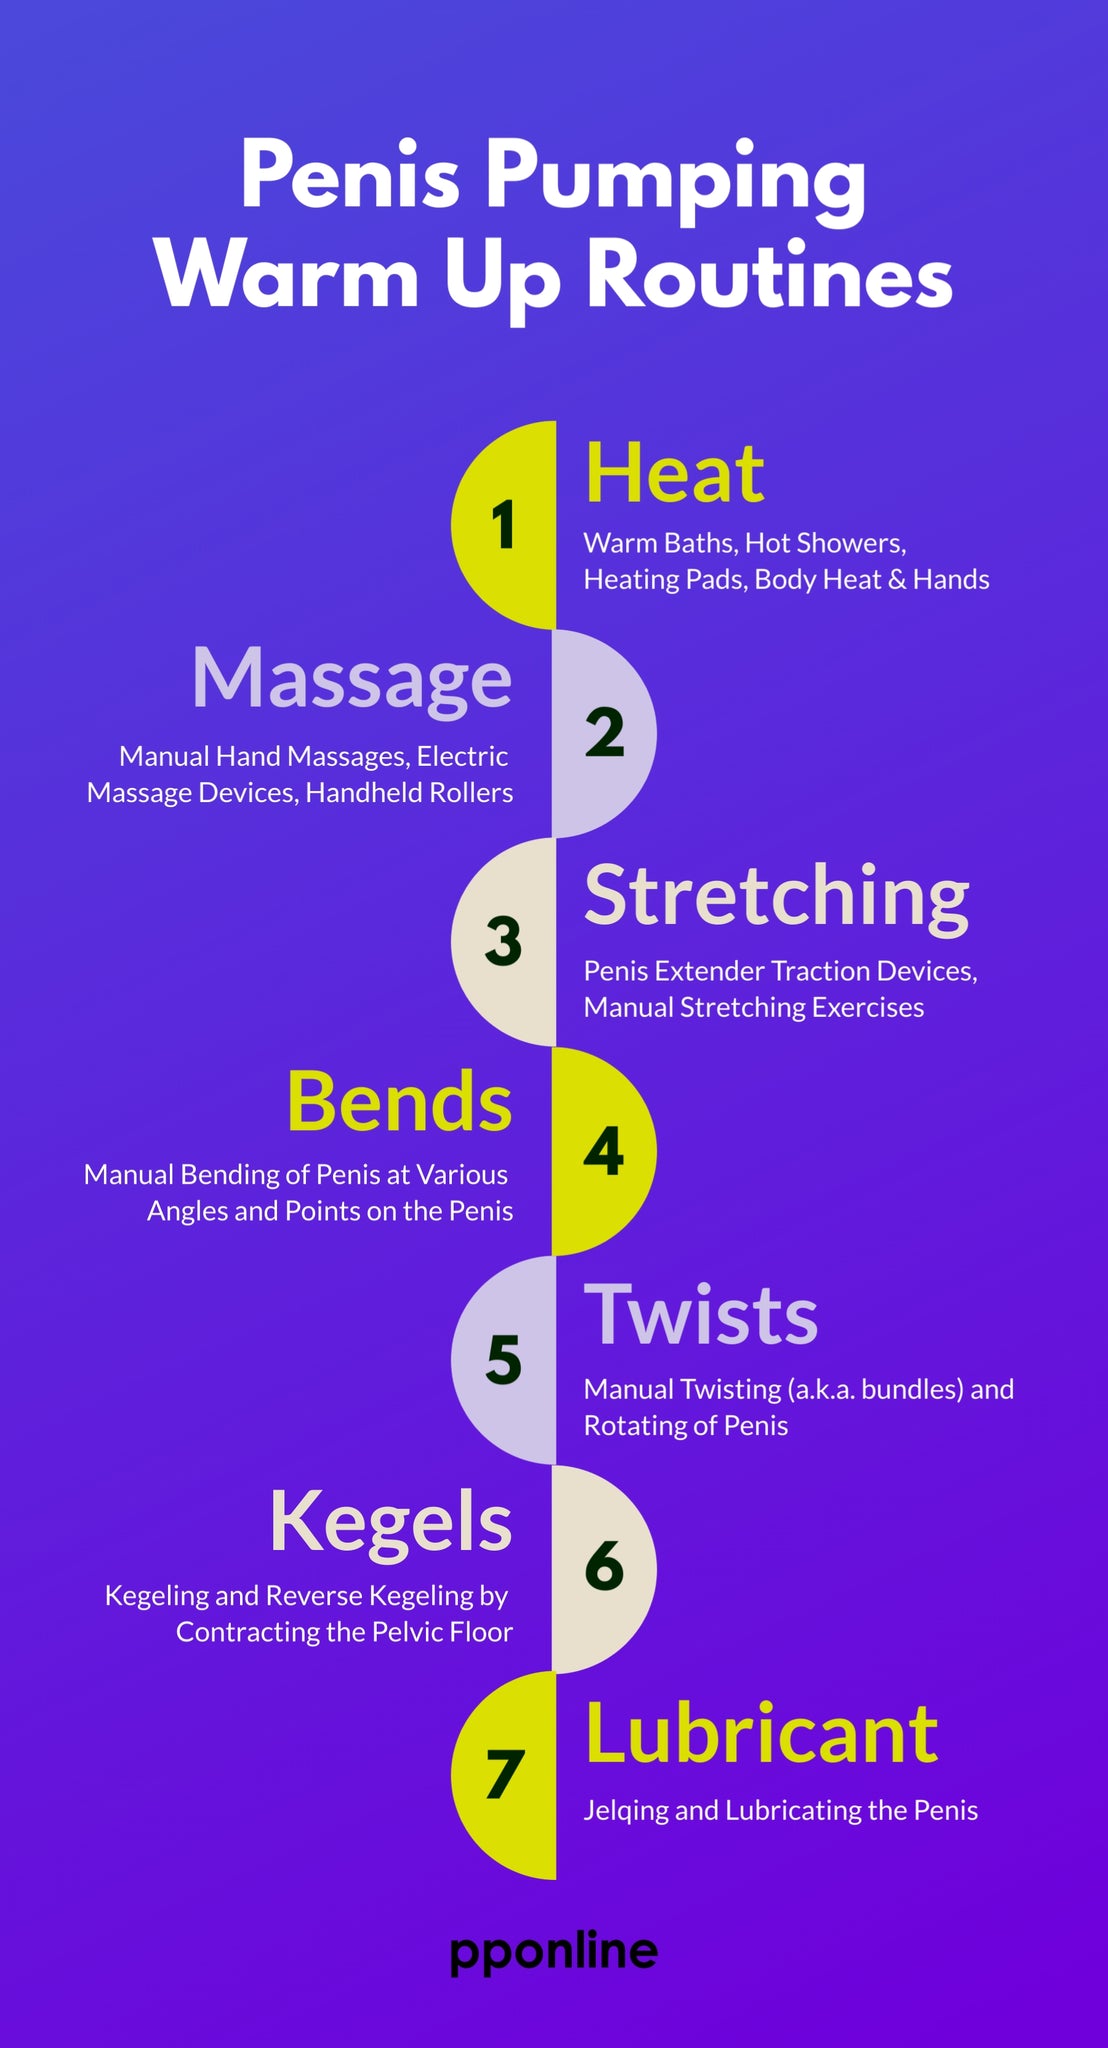 Penis Pumping Warm Up Routines Infographic